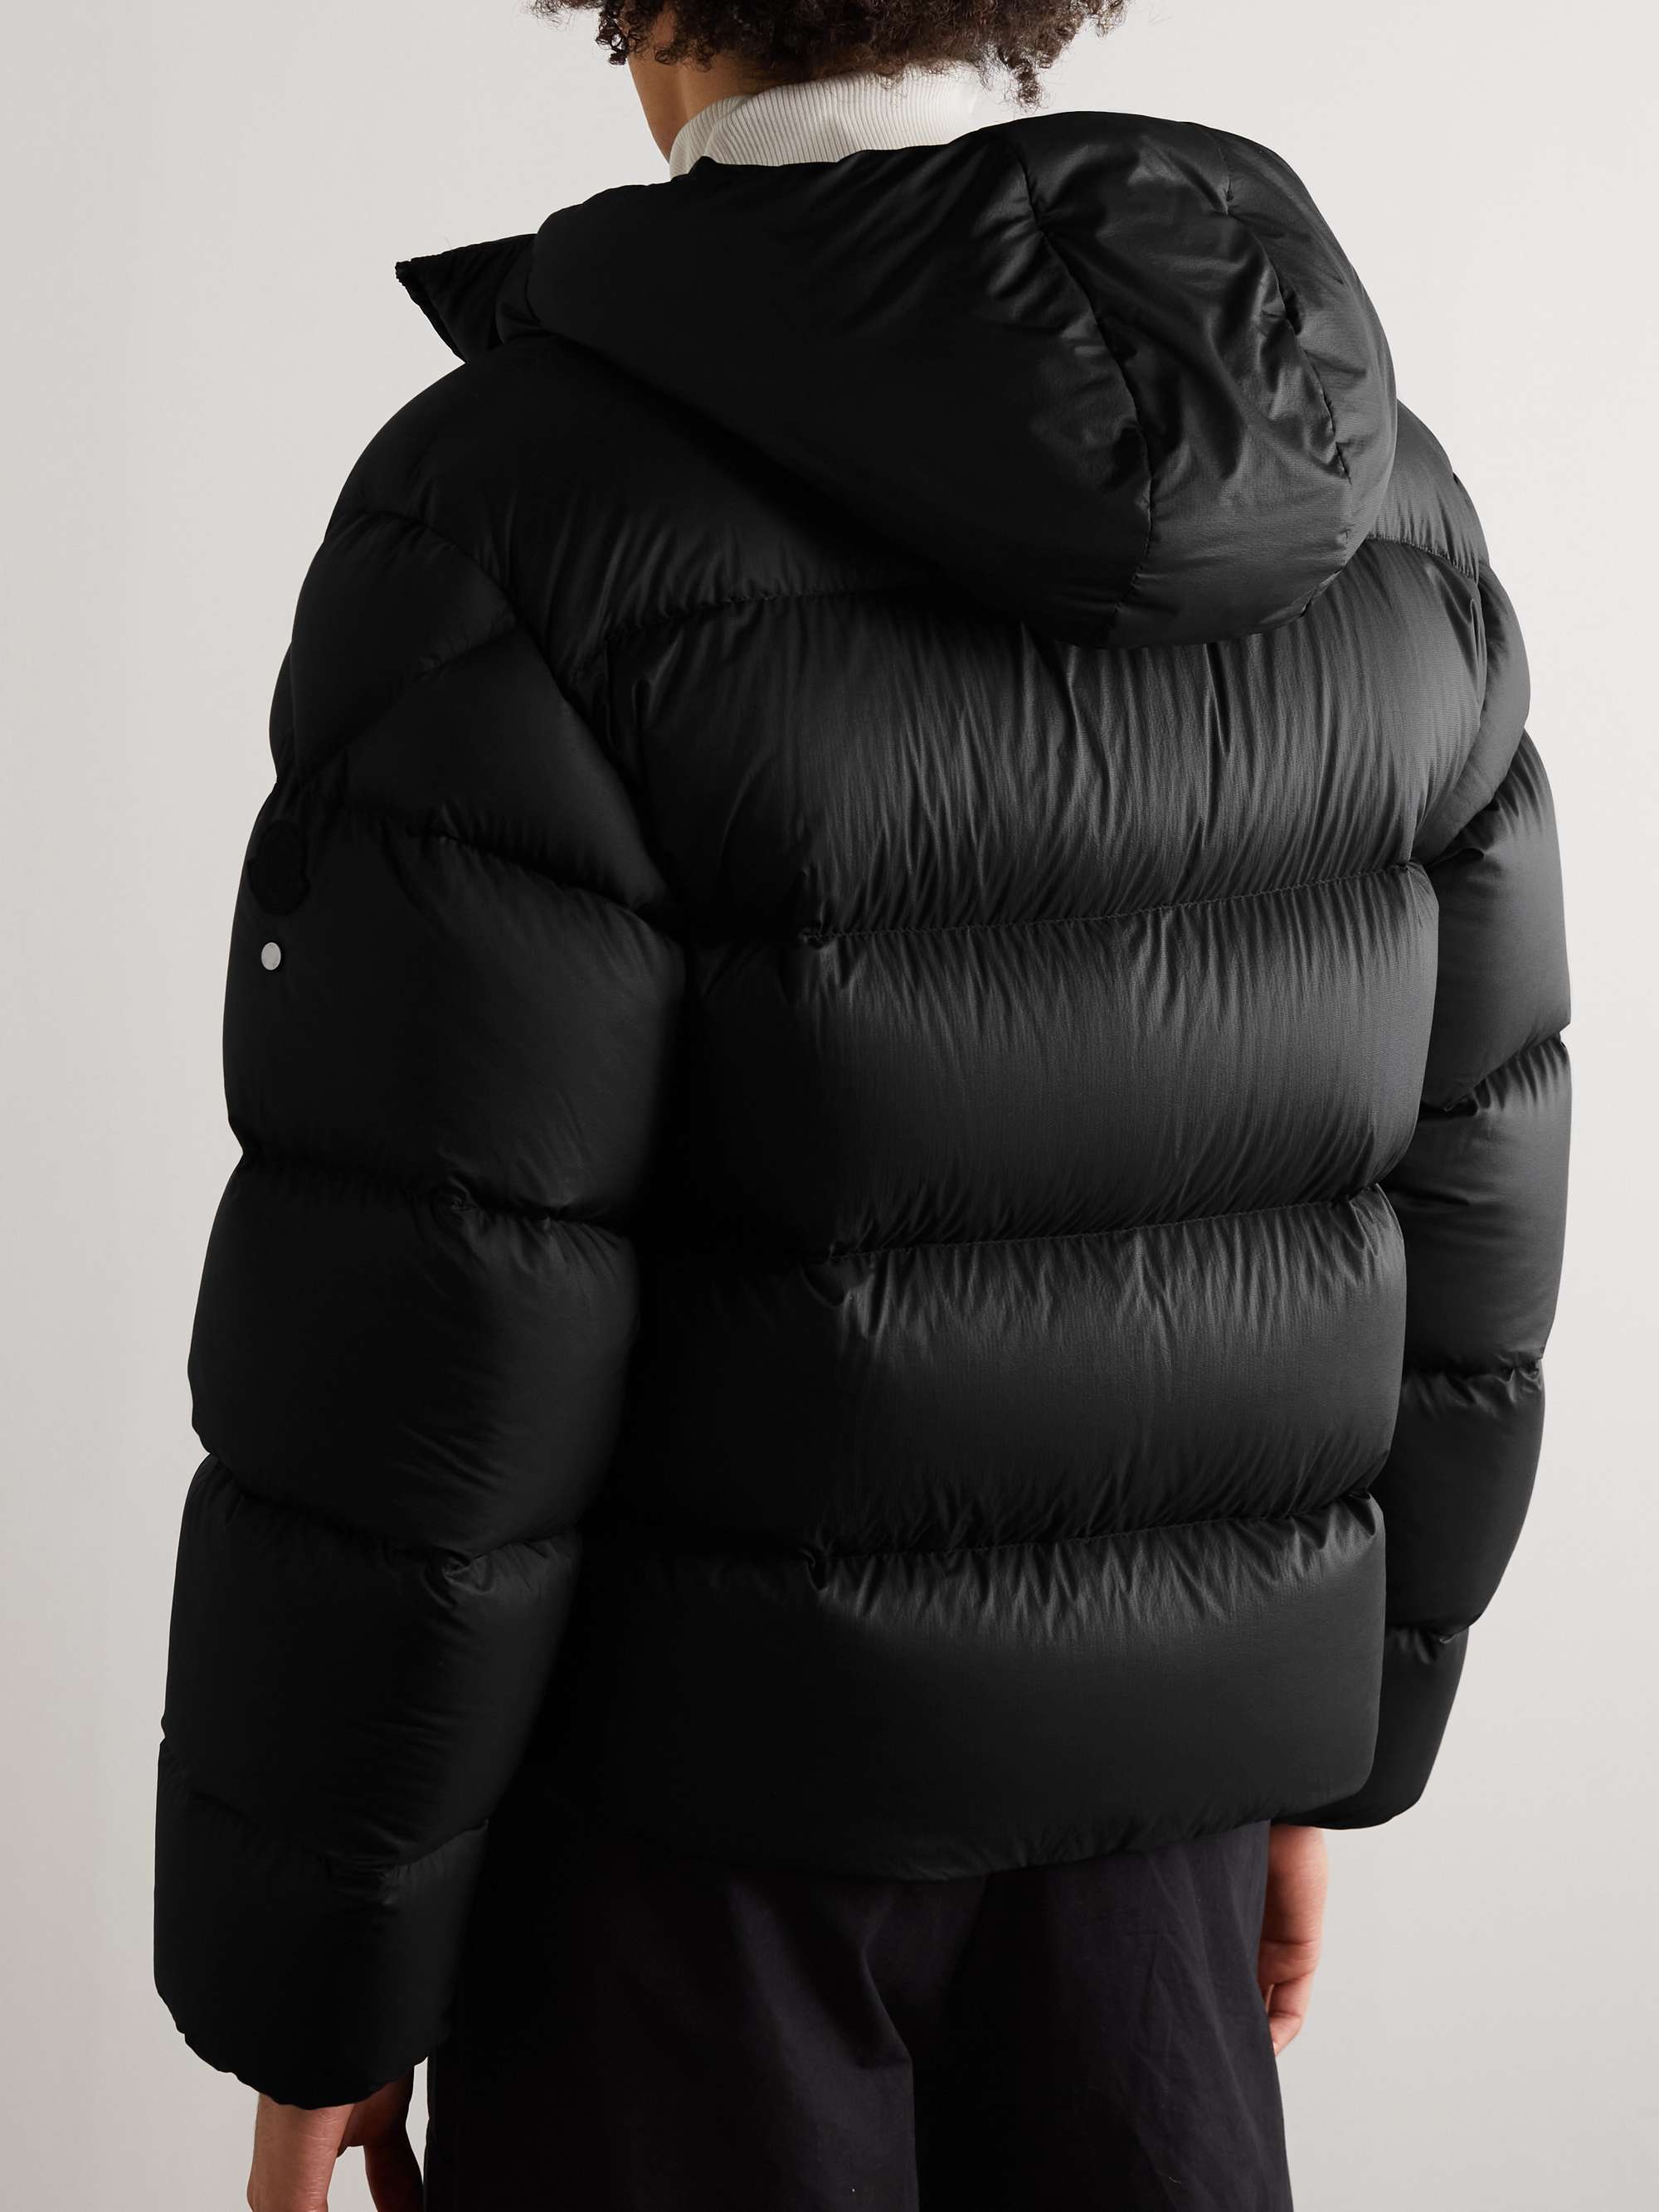 MONCLER GENIUS 6 Moncler 1017 ALYX 9SM Padded Shell Down Jacket